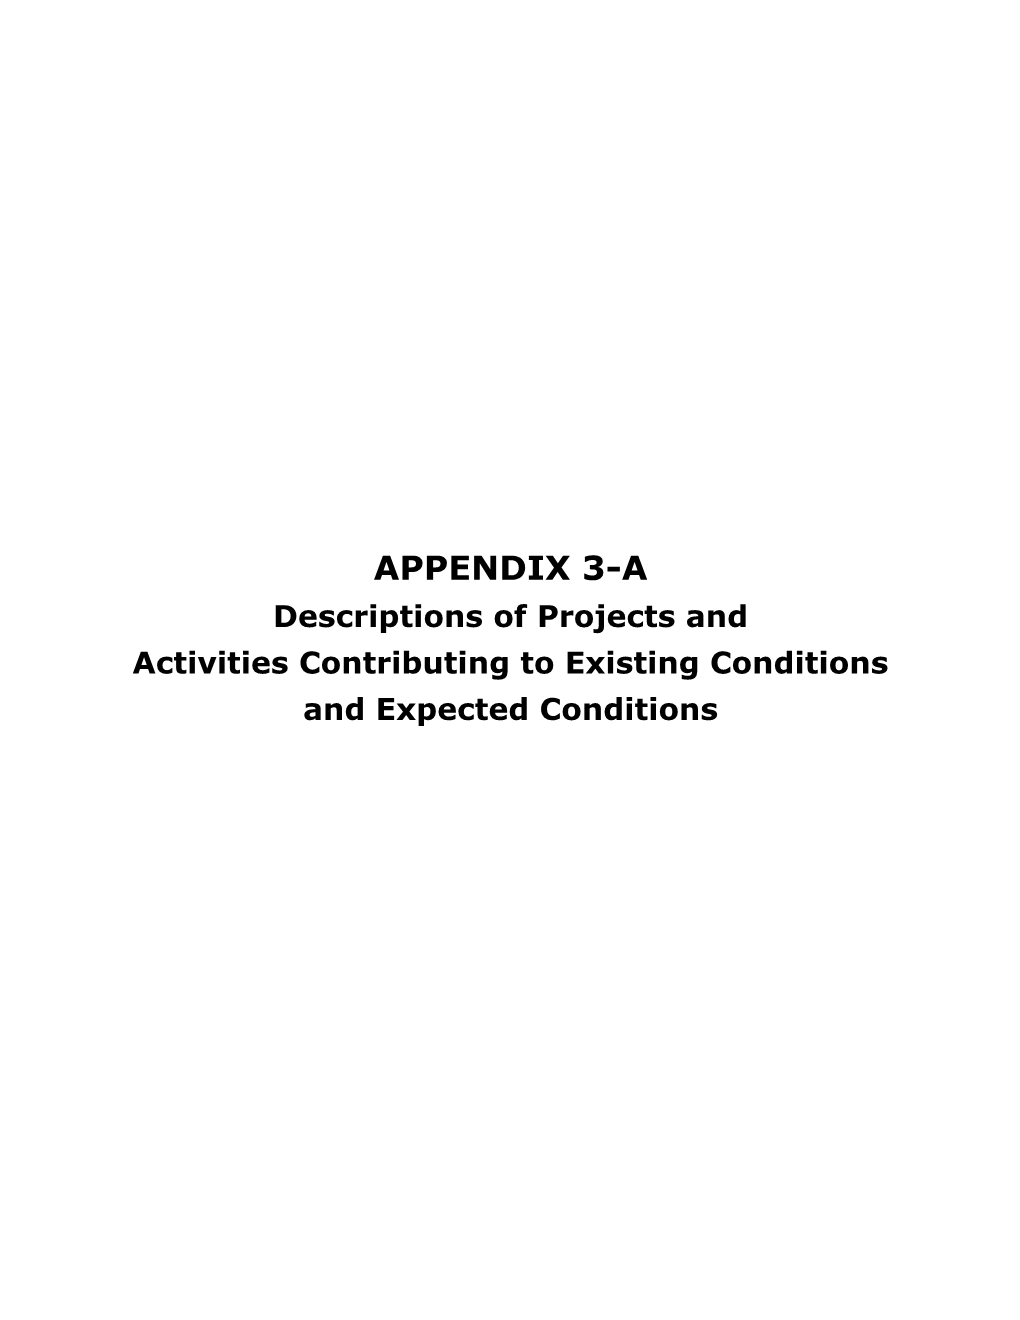 APPENDIX 3-A Descriptions of Projects and Activities Contributing to Existing Conditions and Expected Conditions